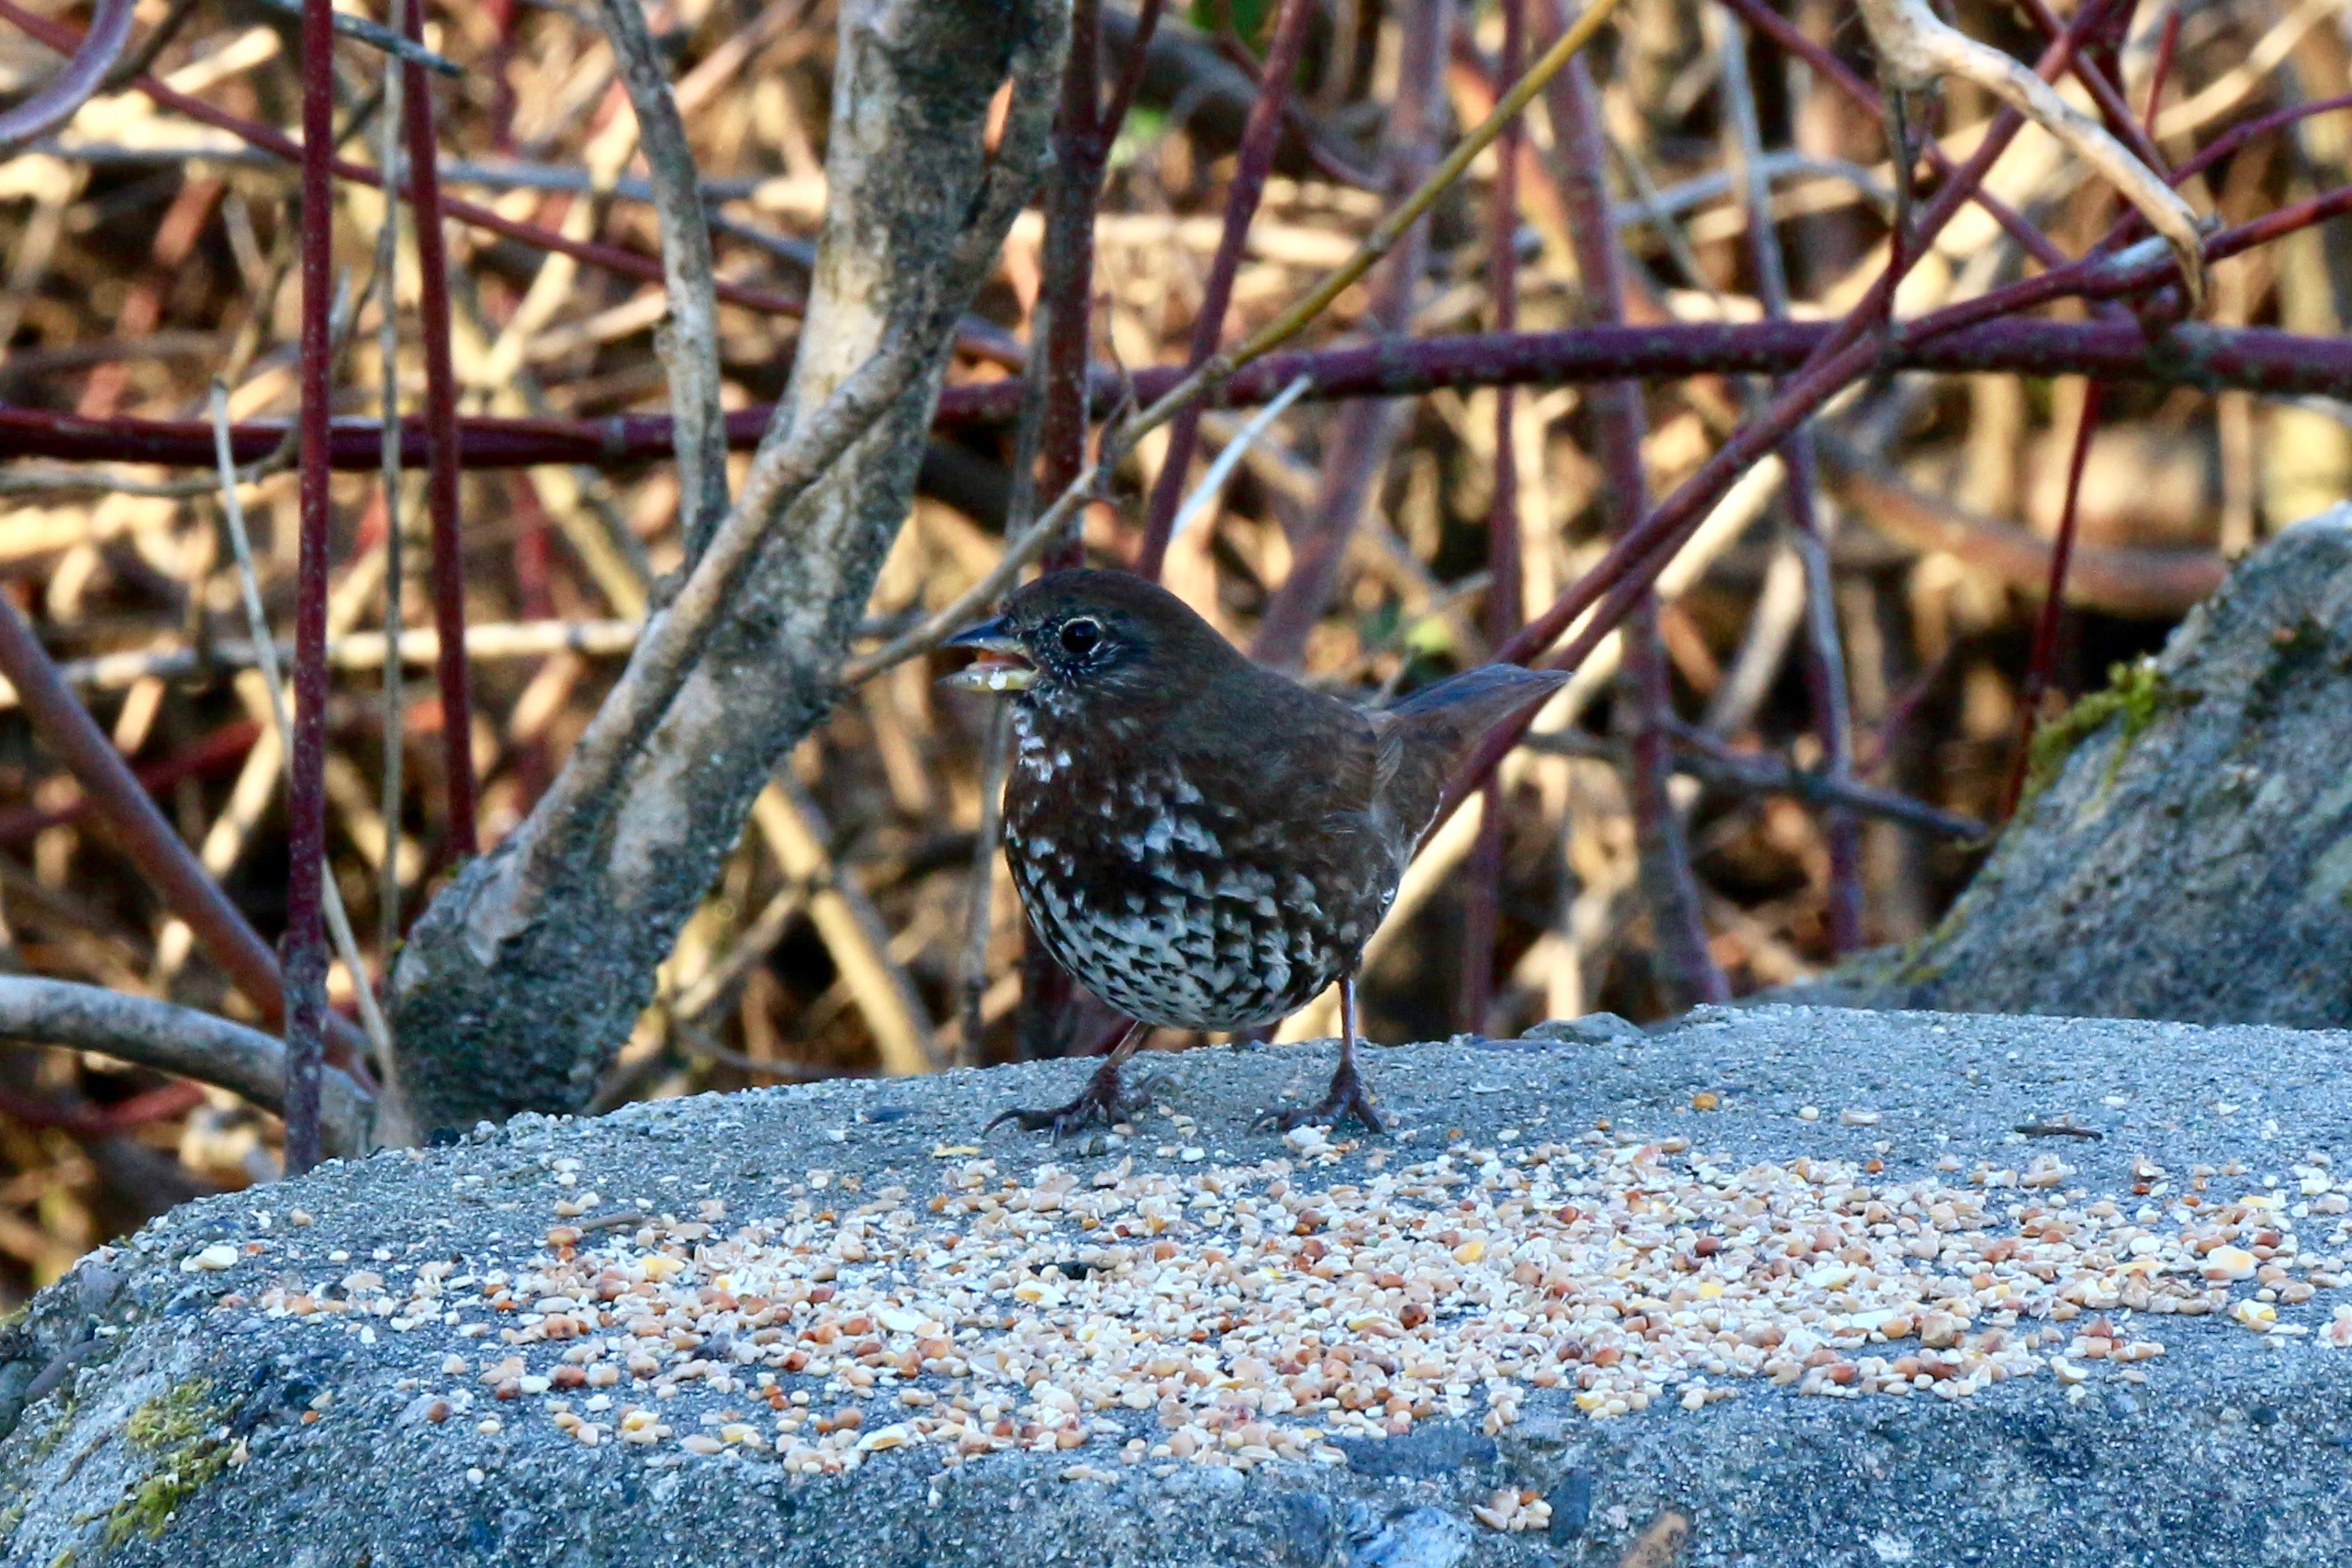 A fox sparrow is perched on a rock, grain stuck to its beak, in front of a large pile of grain that someone set out for it. It is a sooty looking chocolate brown bird with white diamond shaped markings down its breast.
